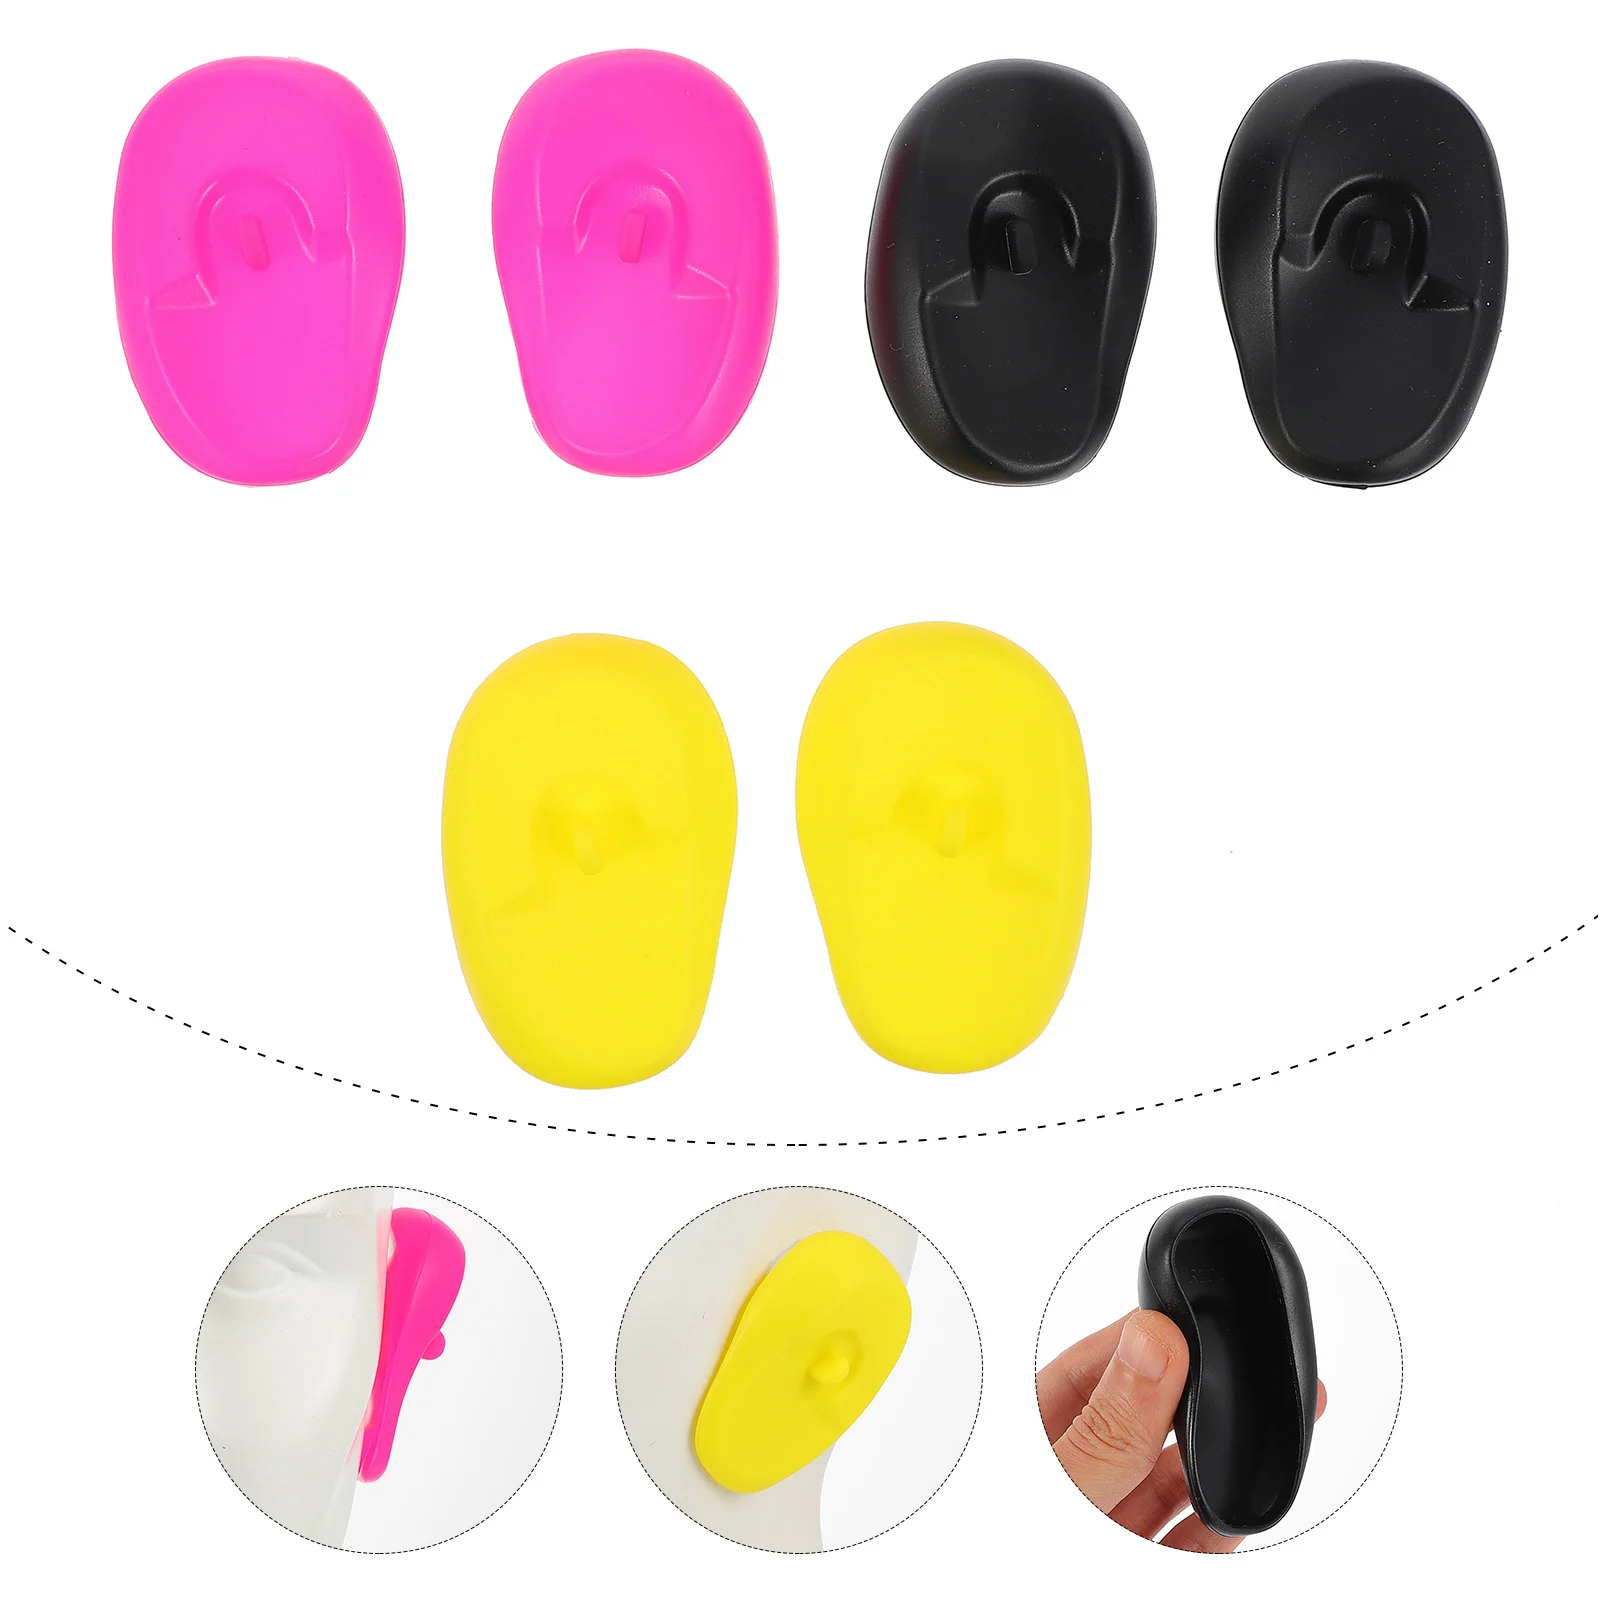 

Ear Hair Dye Earmuffs Protectors Covers Caps Cover Shower Coloring Plastic Bath Color Salon Protector Shield Anti Staining